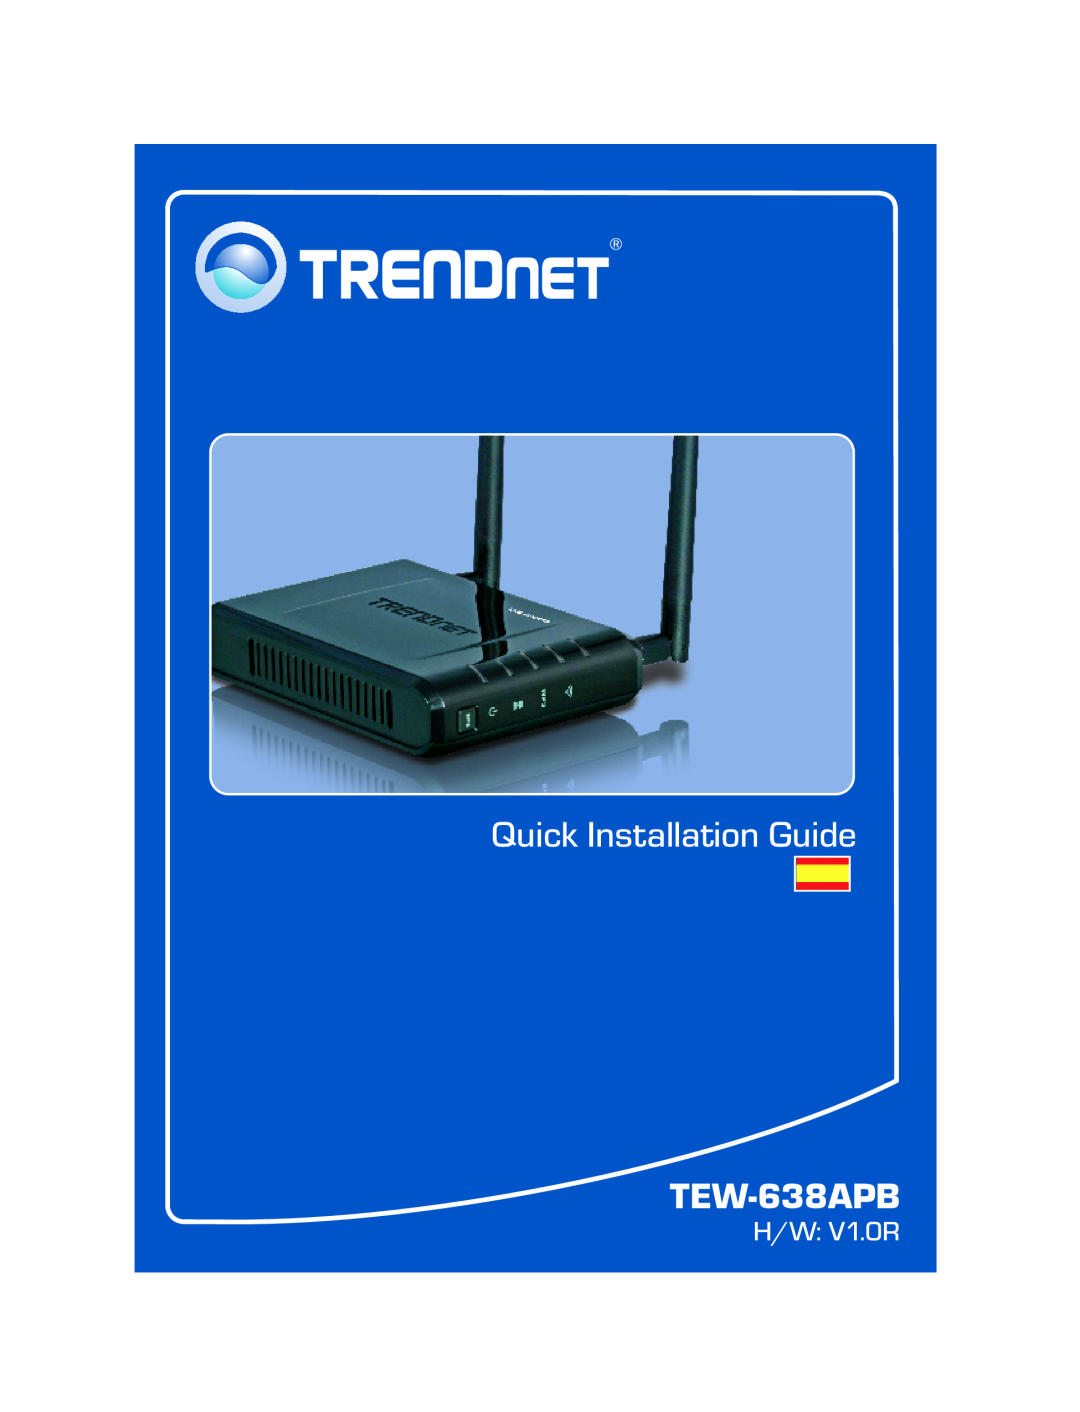 TRENDnet Wireless N Router Internet manual Quick Installation Guide, TEW-638APB, H/W V1.0R 